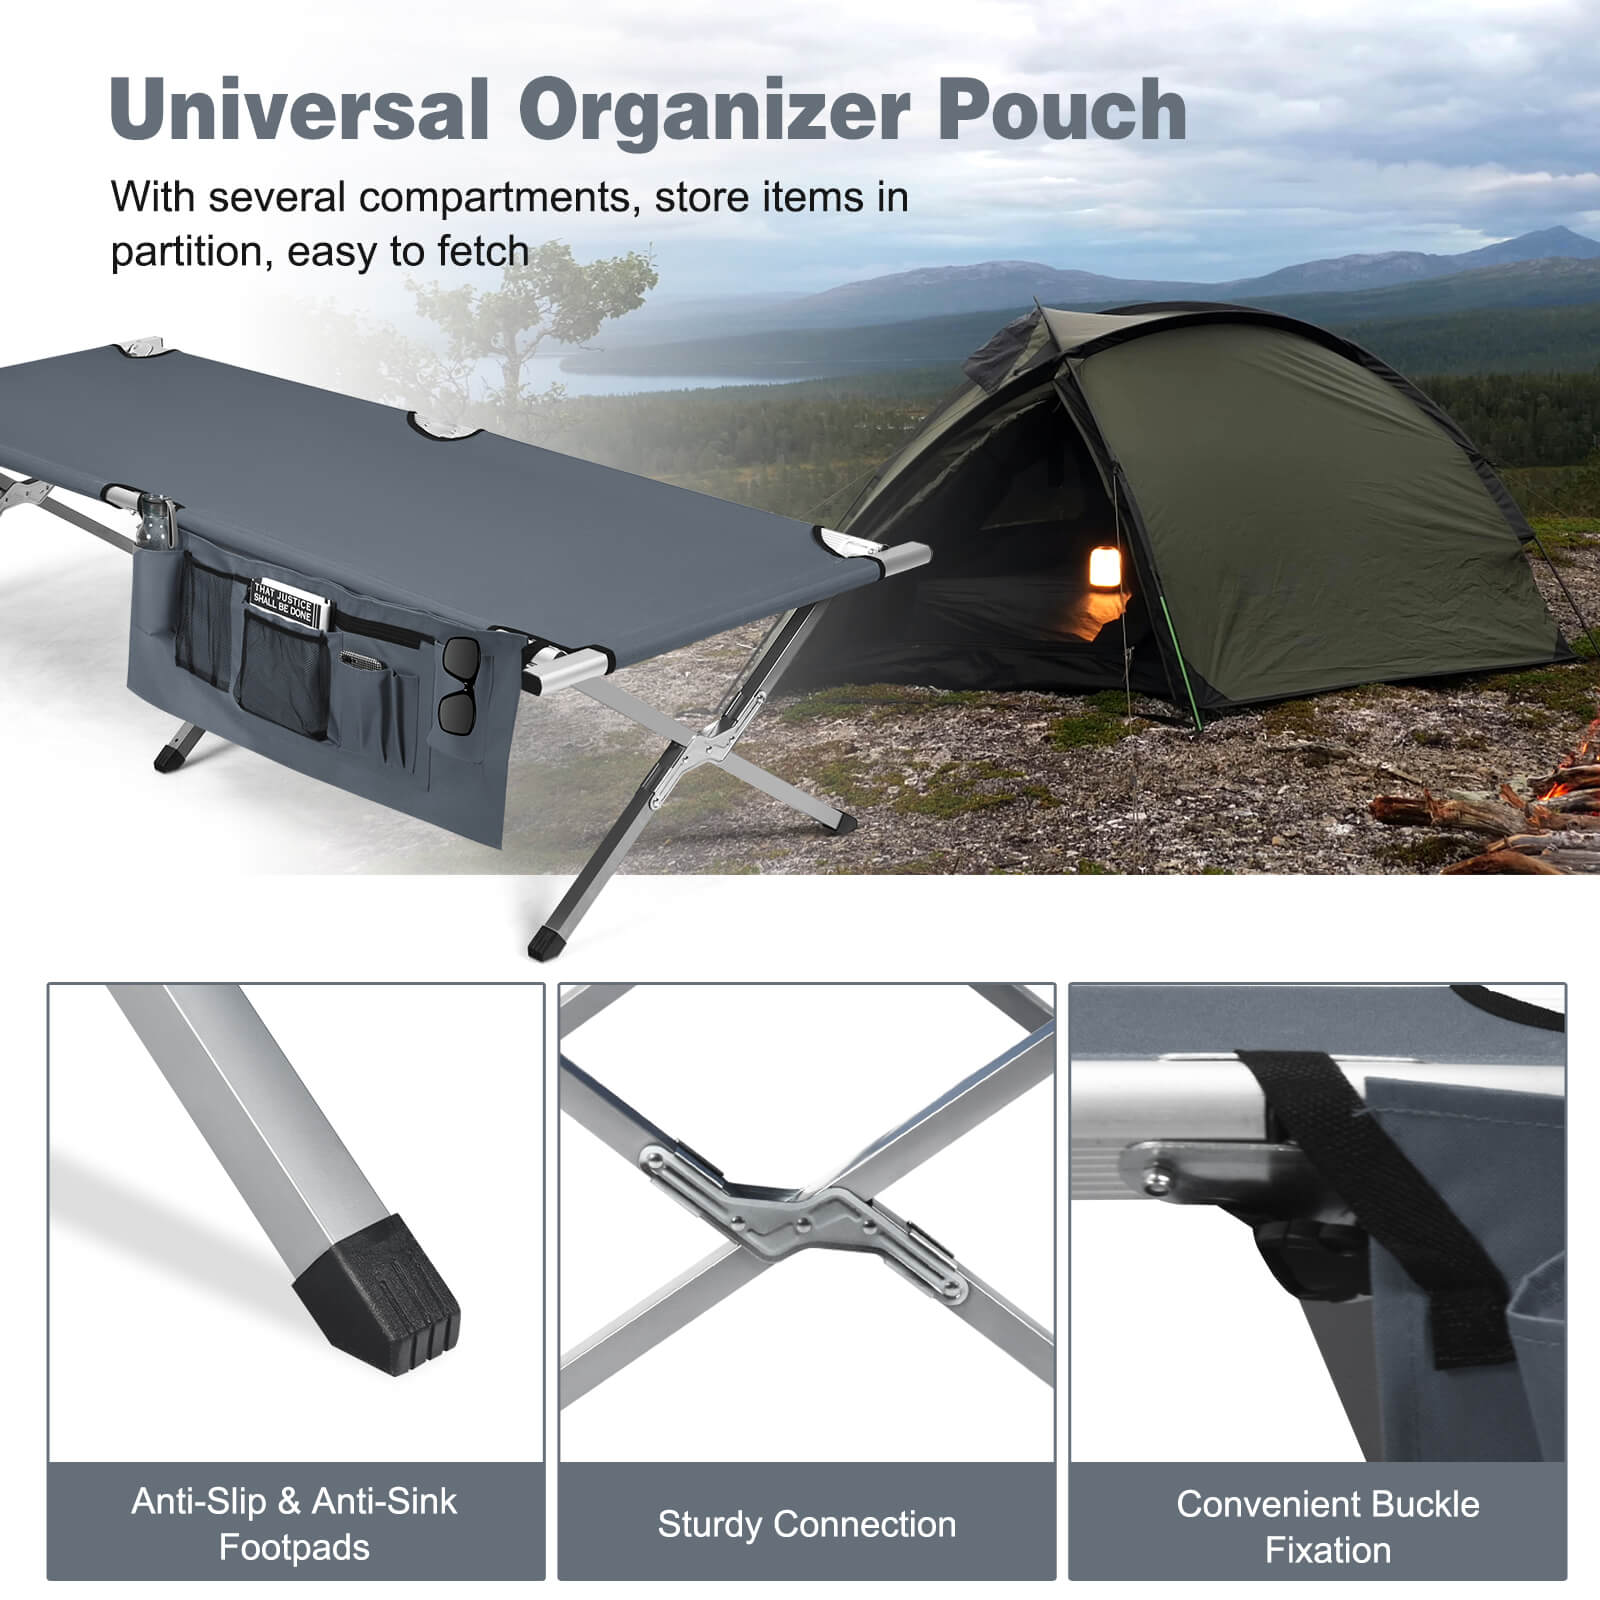 Folding_Camping_Bed_Outdoor_Sleeping_Cot_with_Carry_Bag_for_Beach_Grey-9.jpg